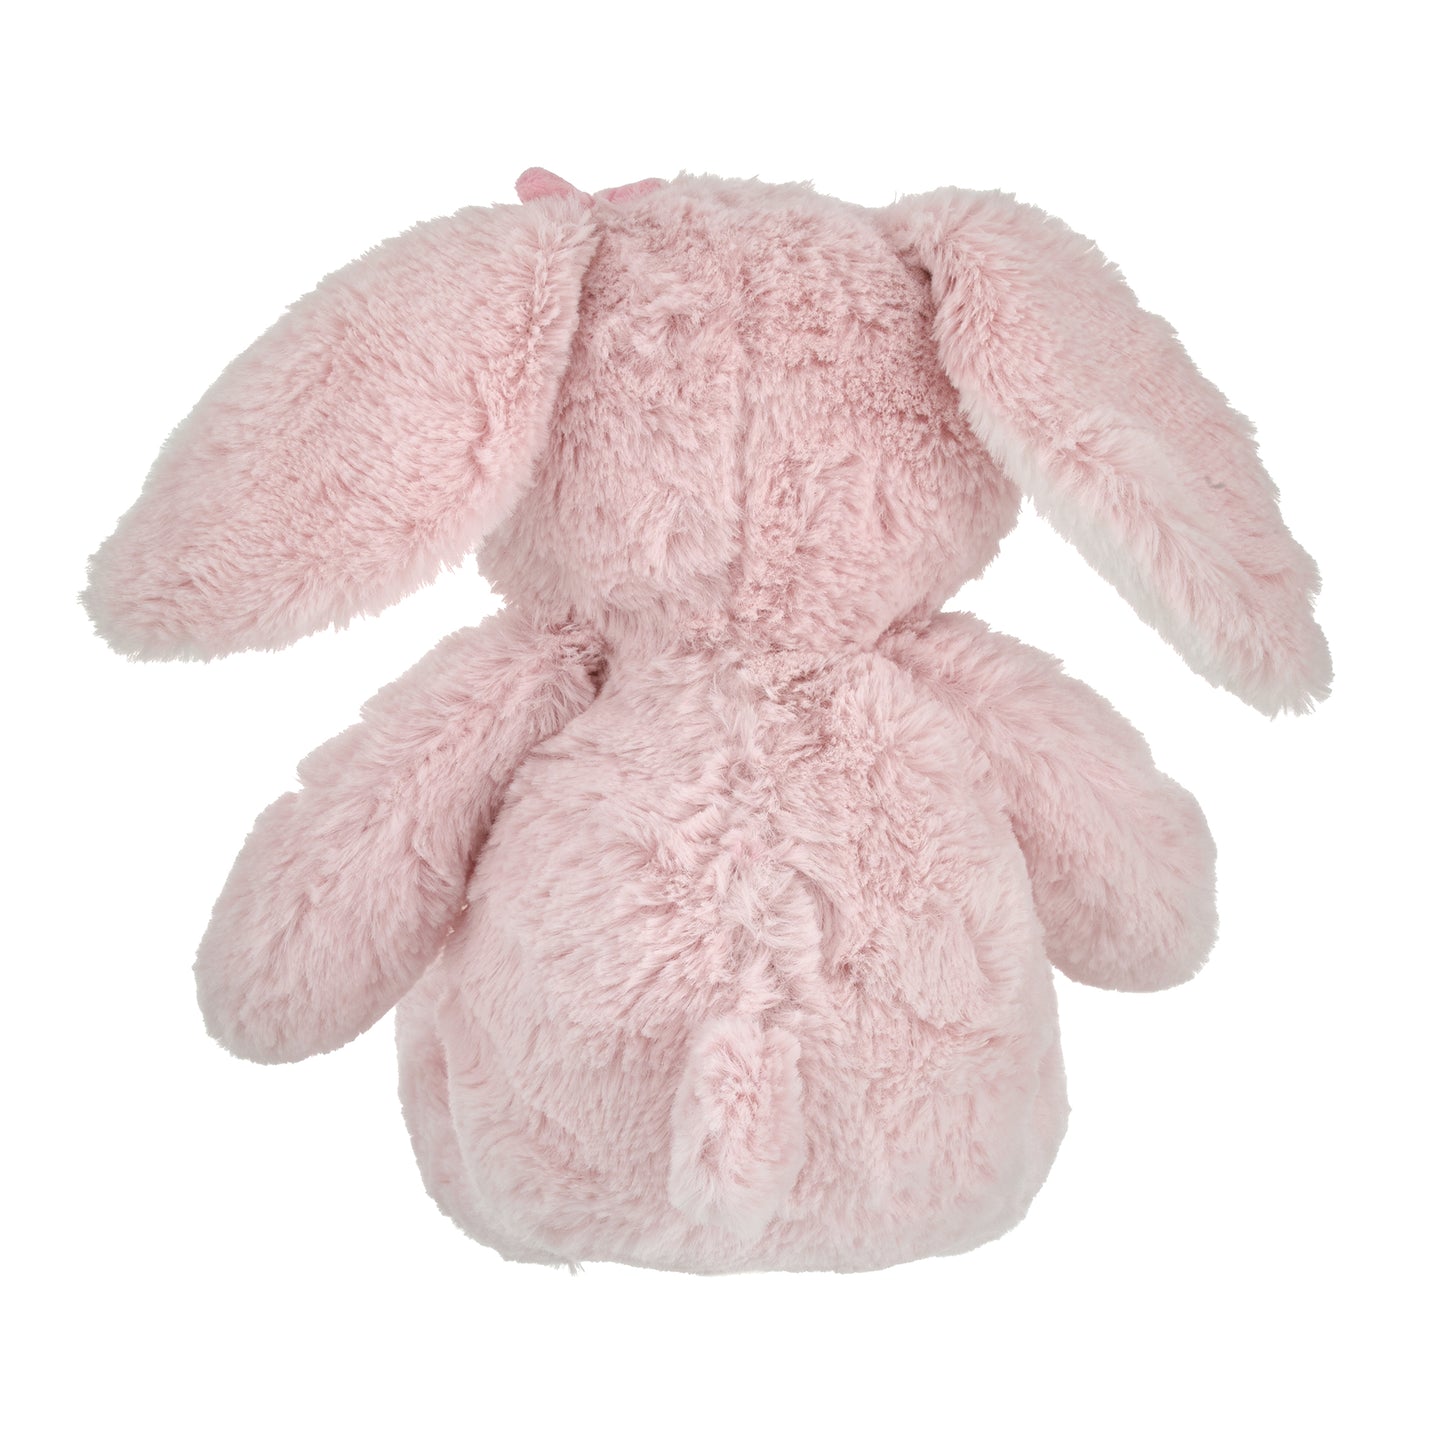 NoJo Keep Blooming Pink and White Super Soft Plush Stuffed Animal Bunny with Flower - "Opal"